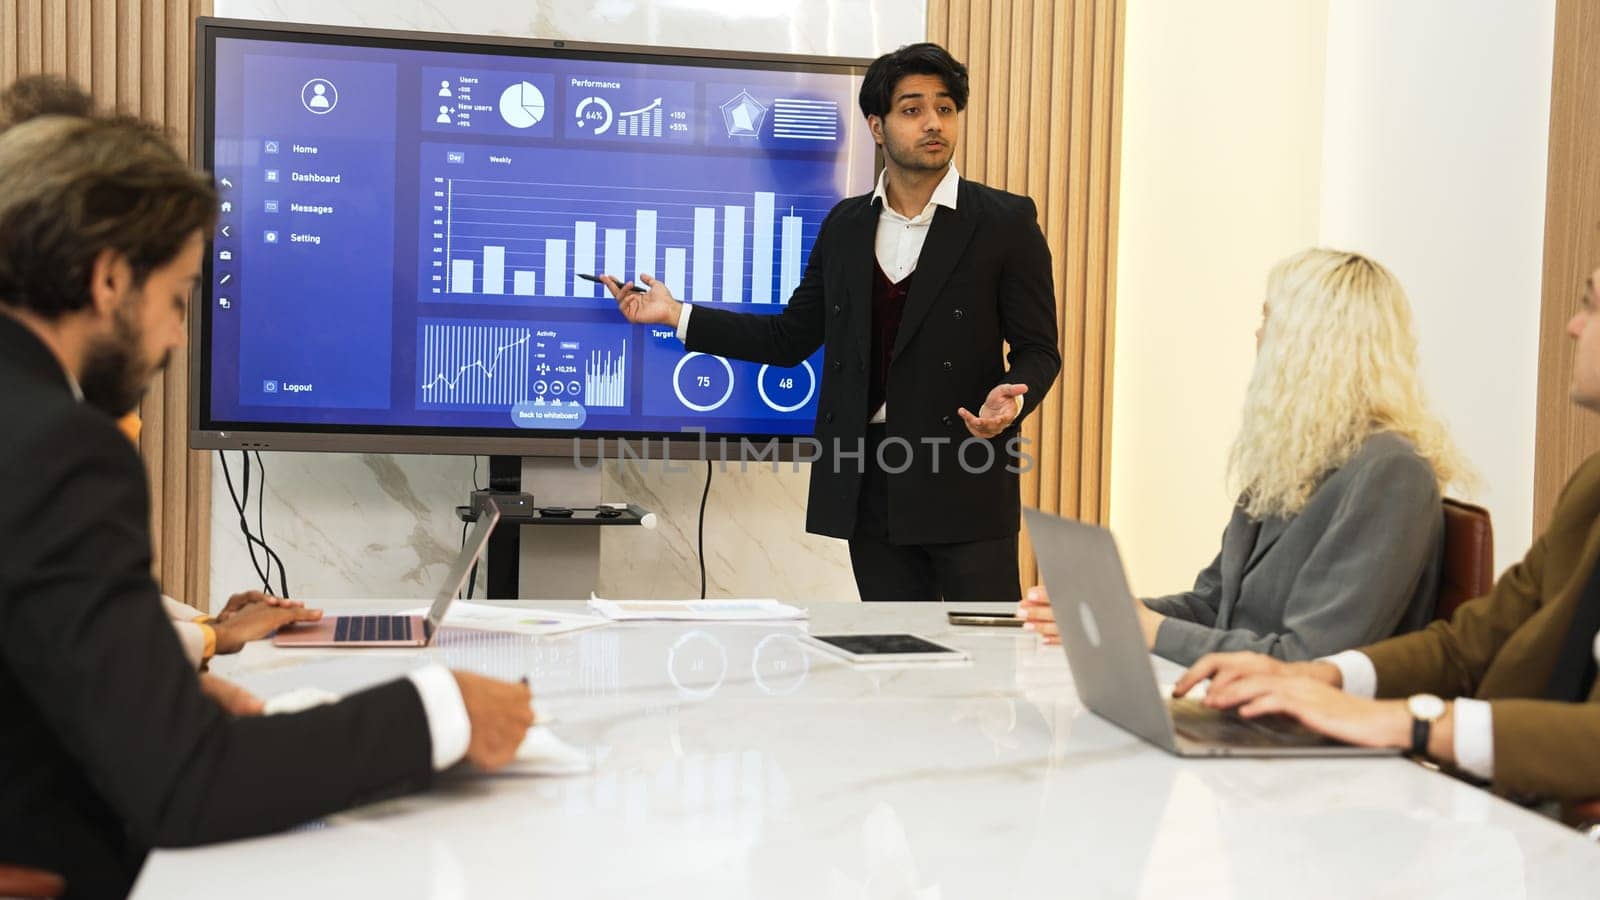 Presentation in office or ornament meeting room with analyst team utilize BI Fintech to analyze financial data. Businesspeople analyzing BI dashboard power display on TV screen for strategic planning